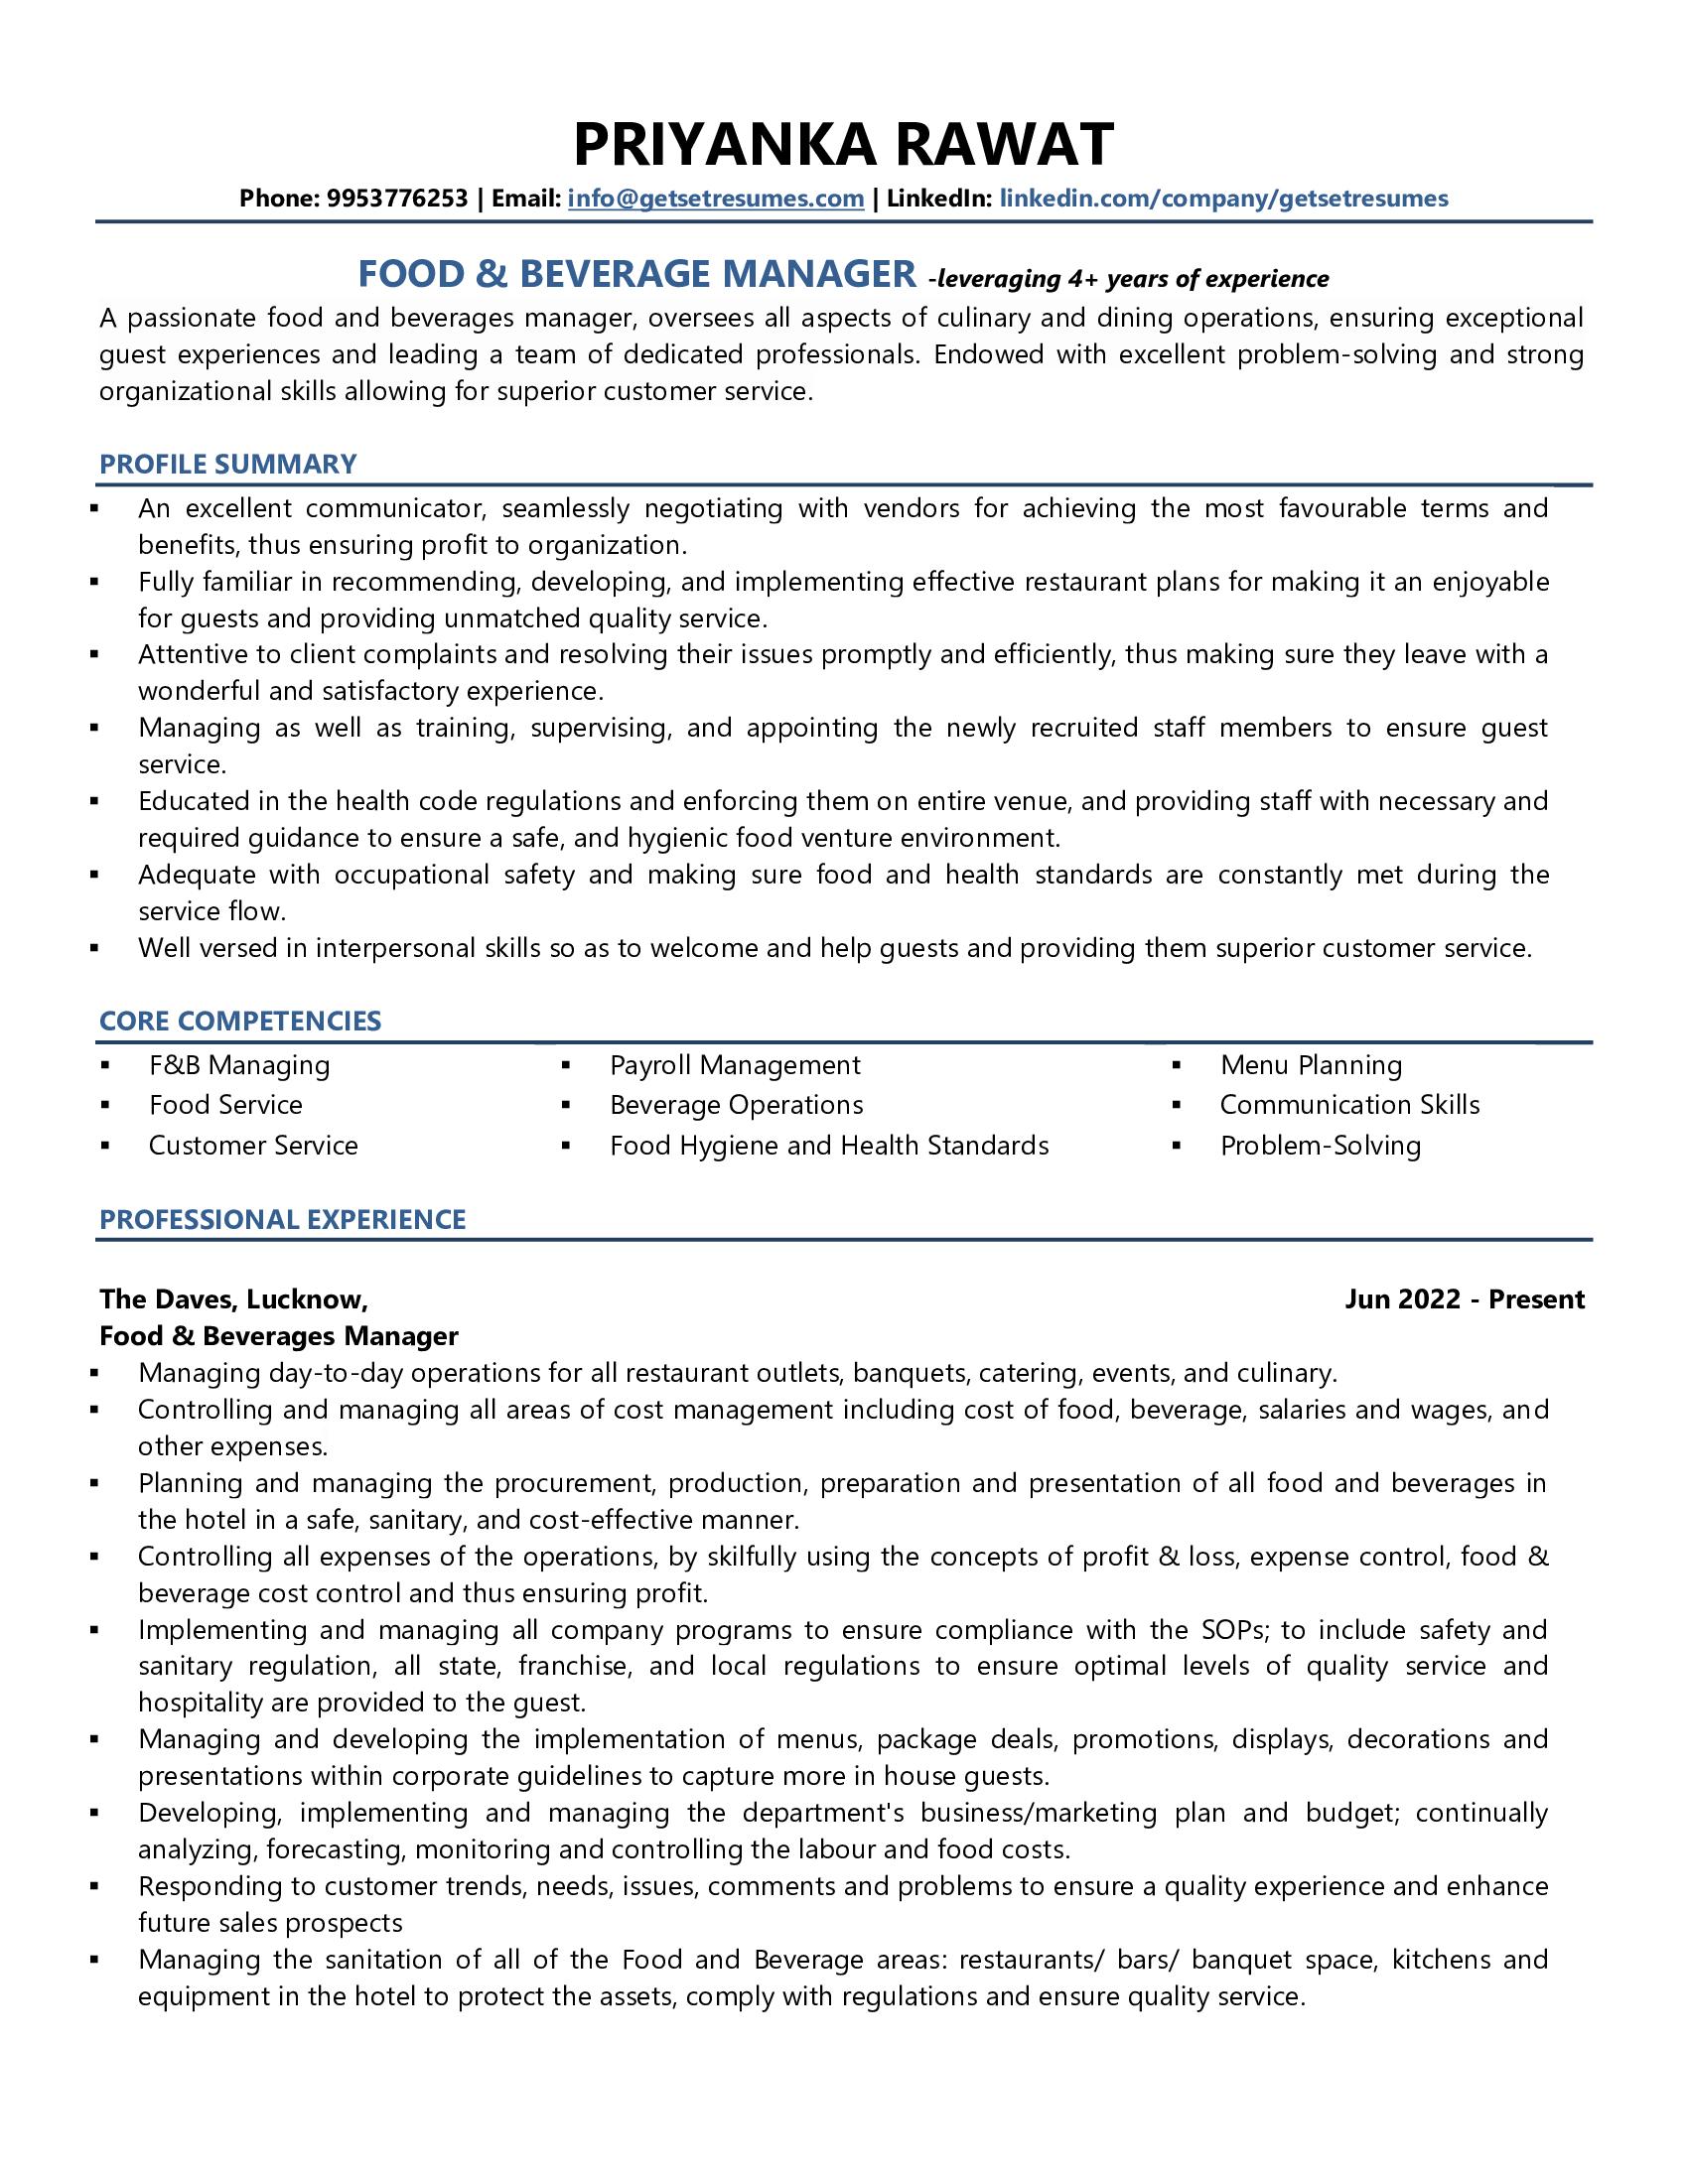 Food & Beverage (F&B) Manager - Resume Example & Template